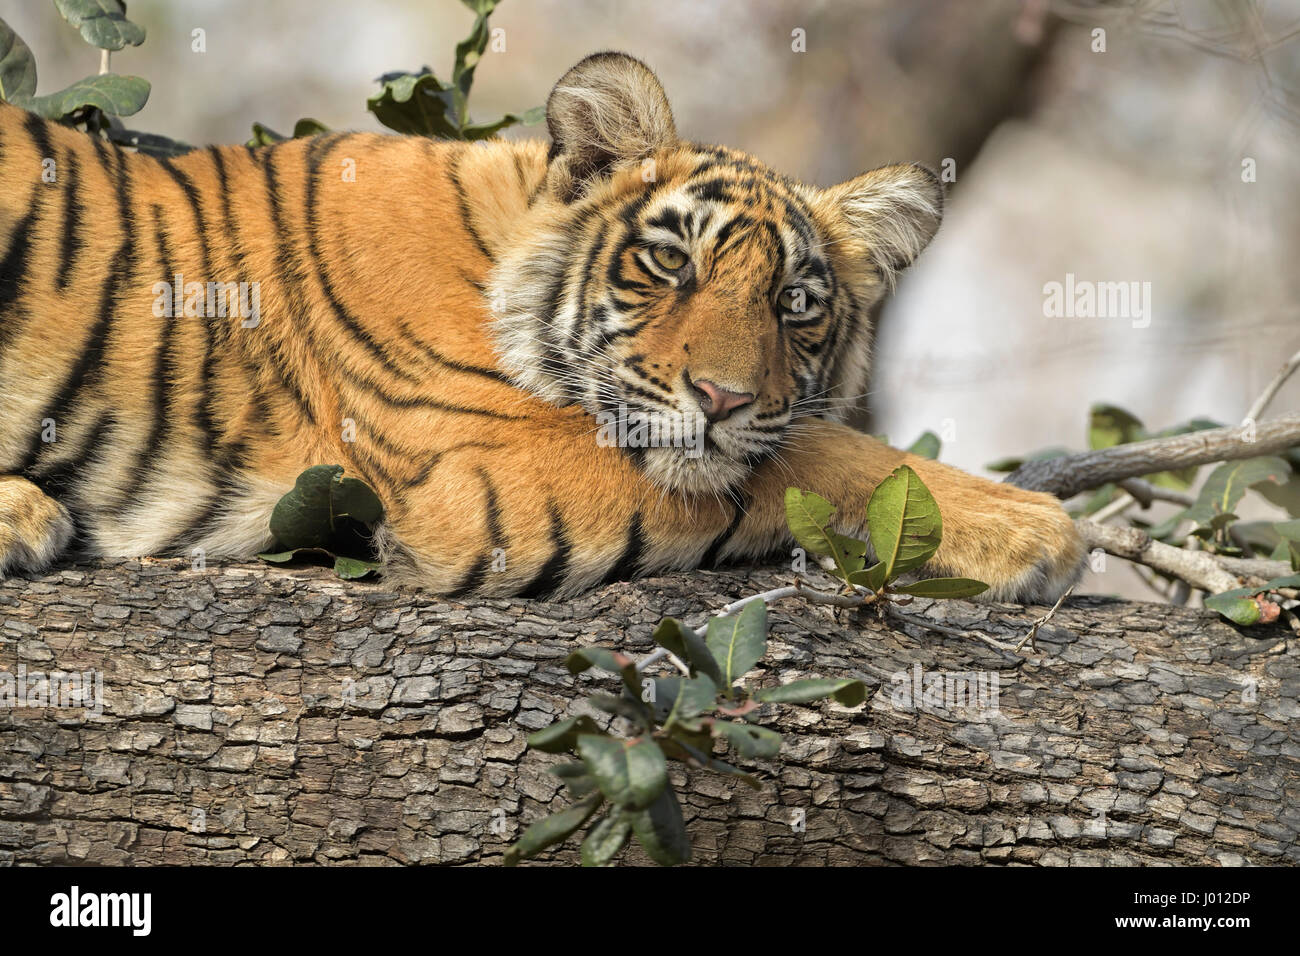 A wild tiger cub sleeping on the trunk of a tree in Ranthambhore tiger reserve of India Stock Photo